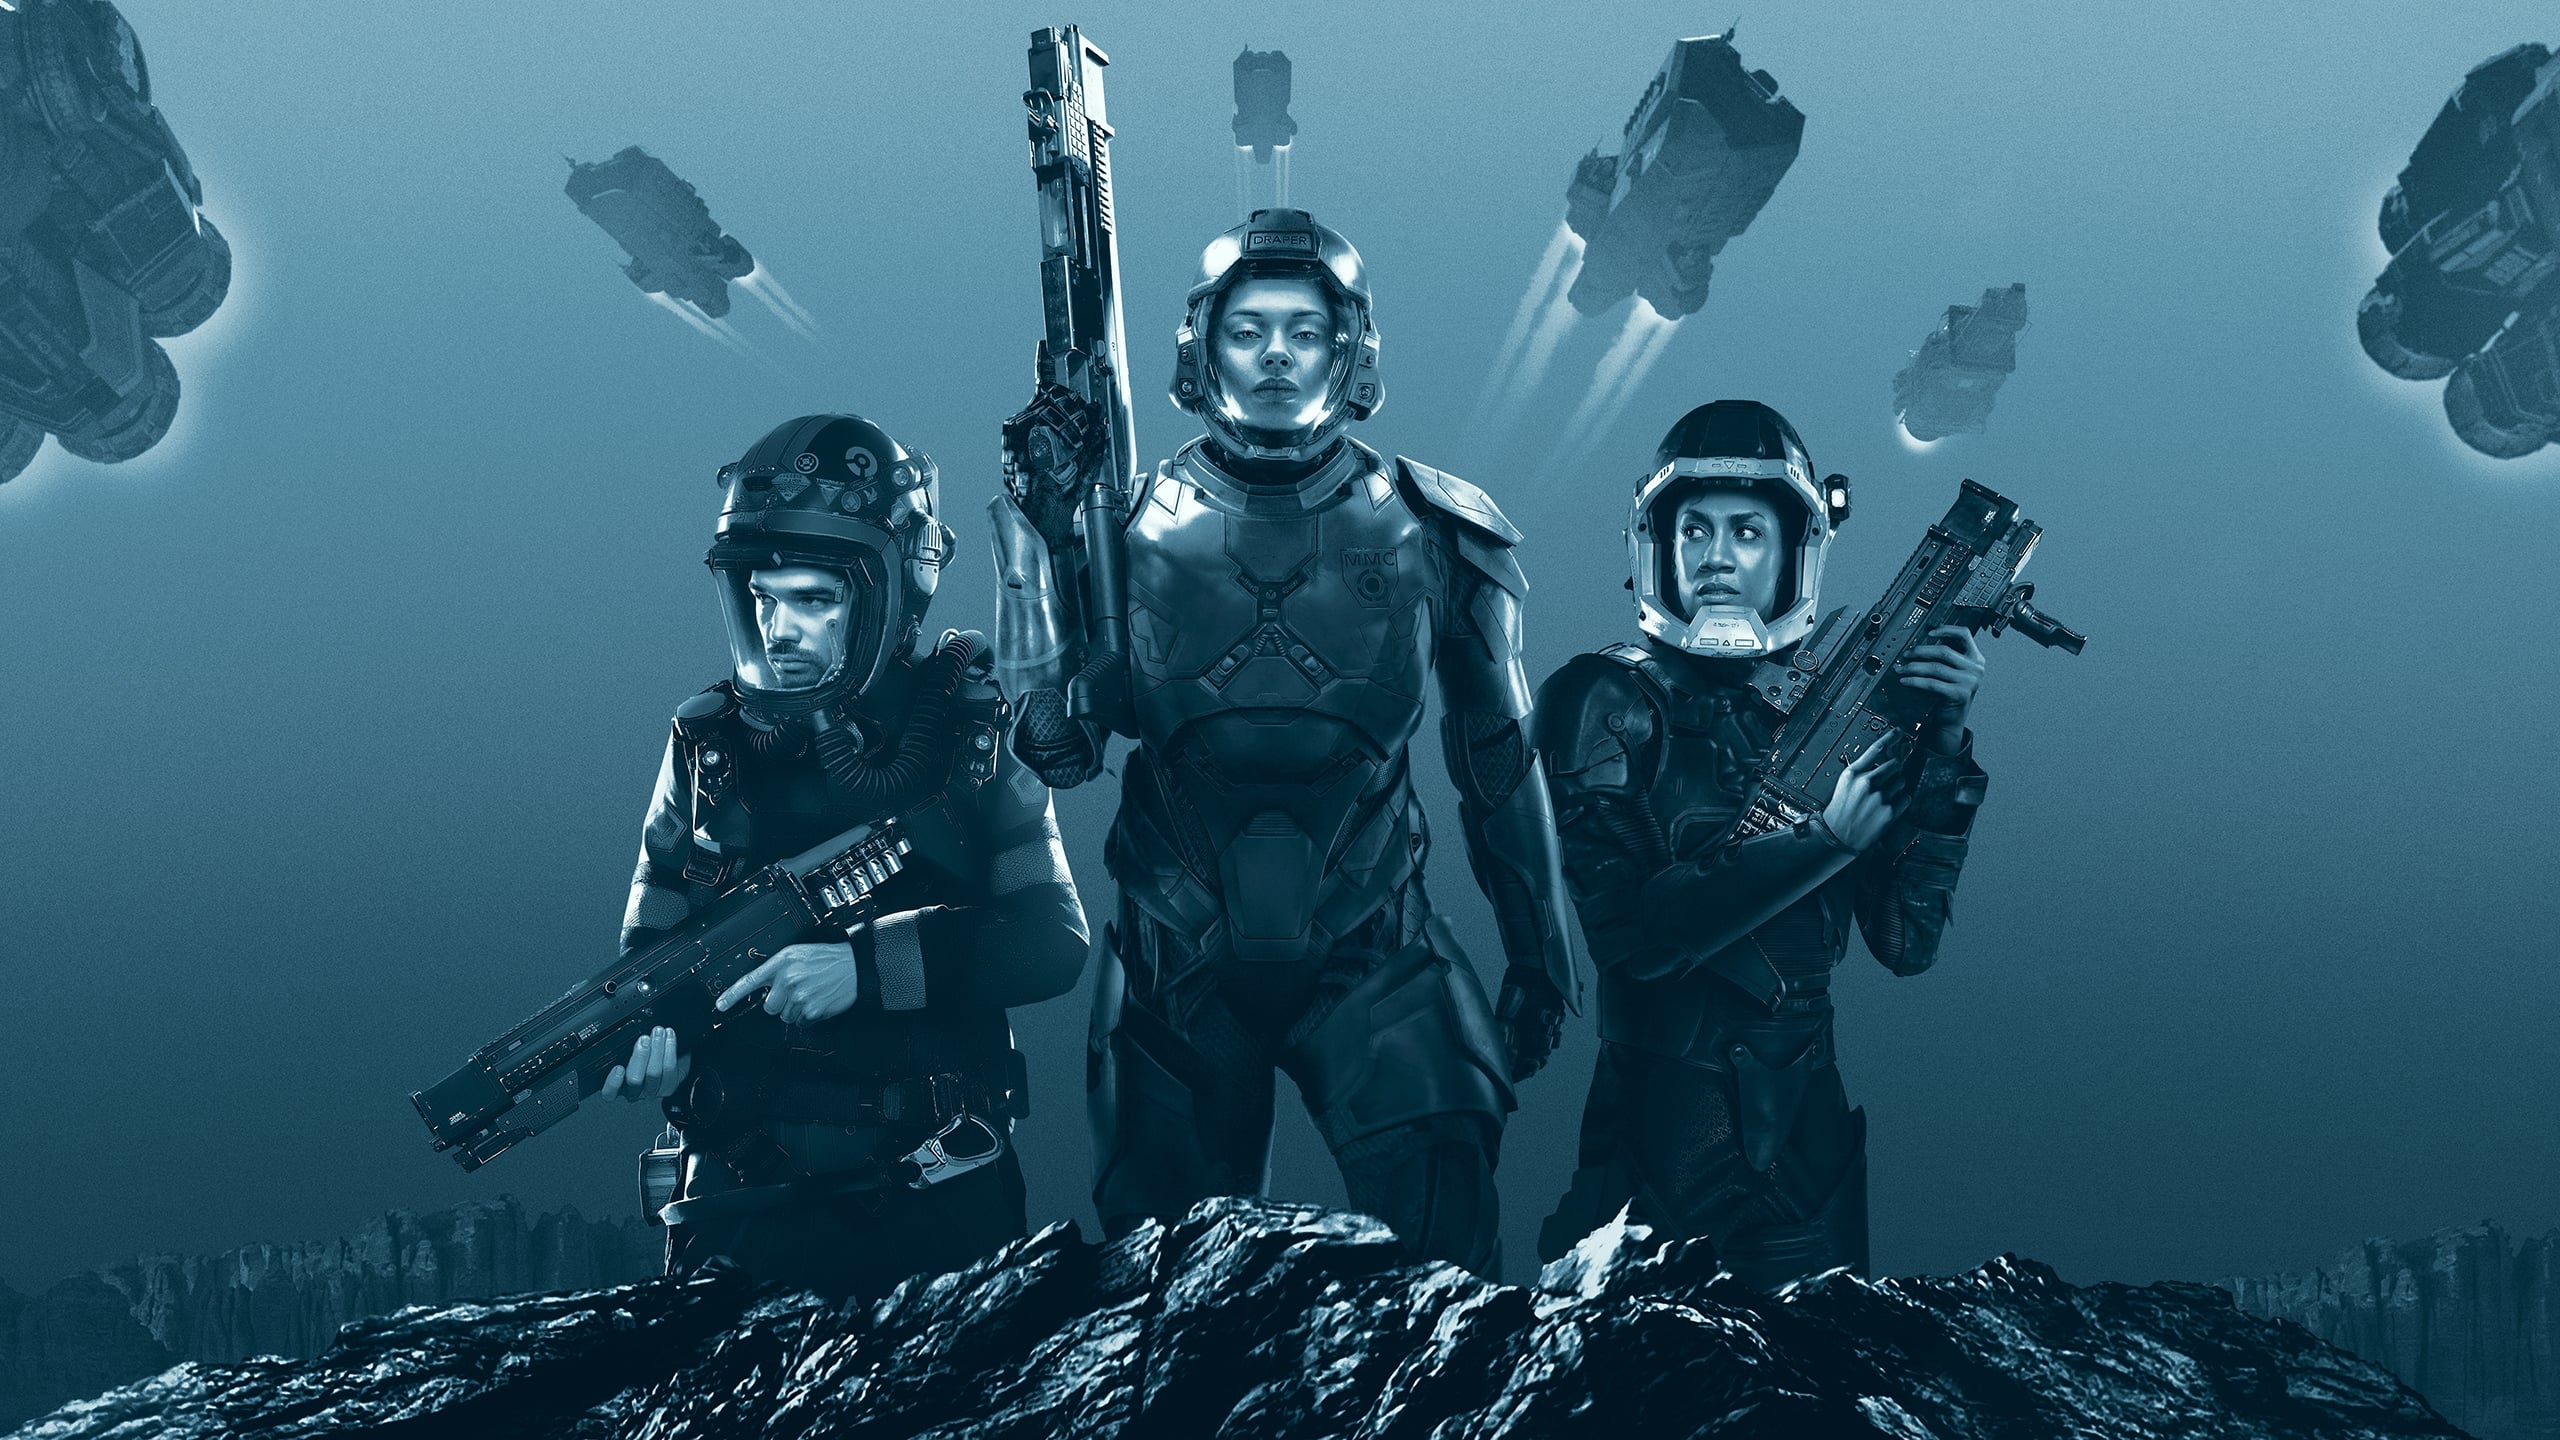 The Expanse 2015 123movies